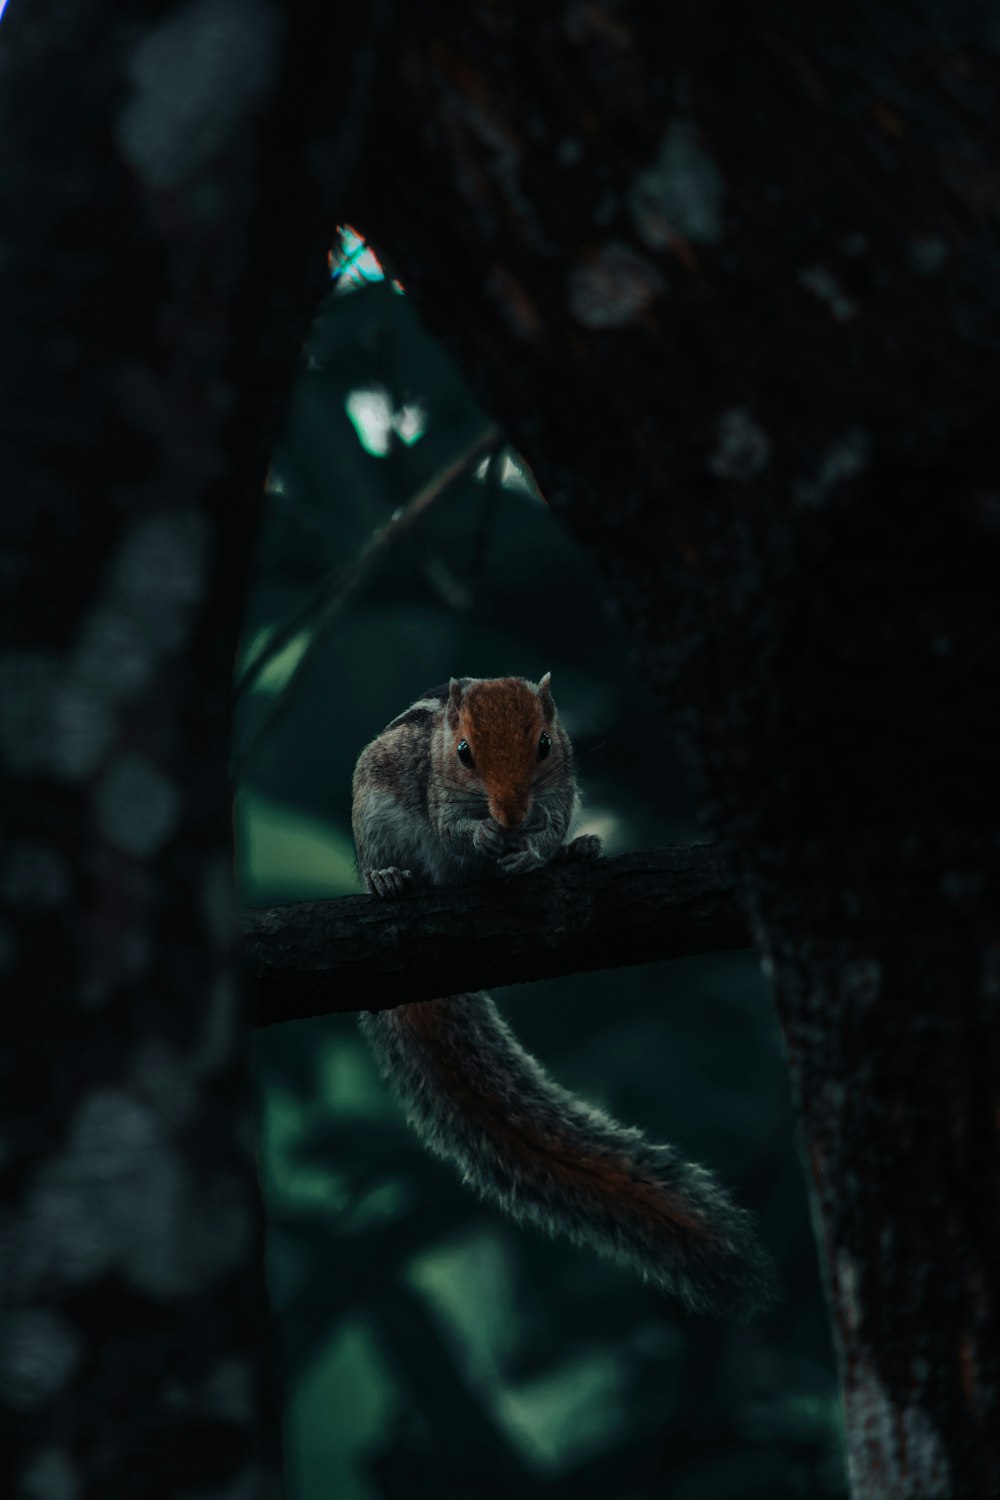 brown squirrel on tree branch